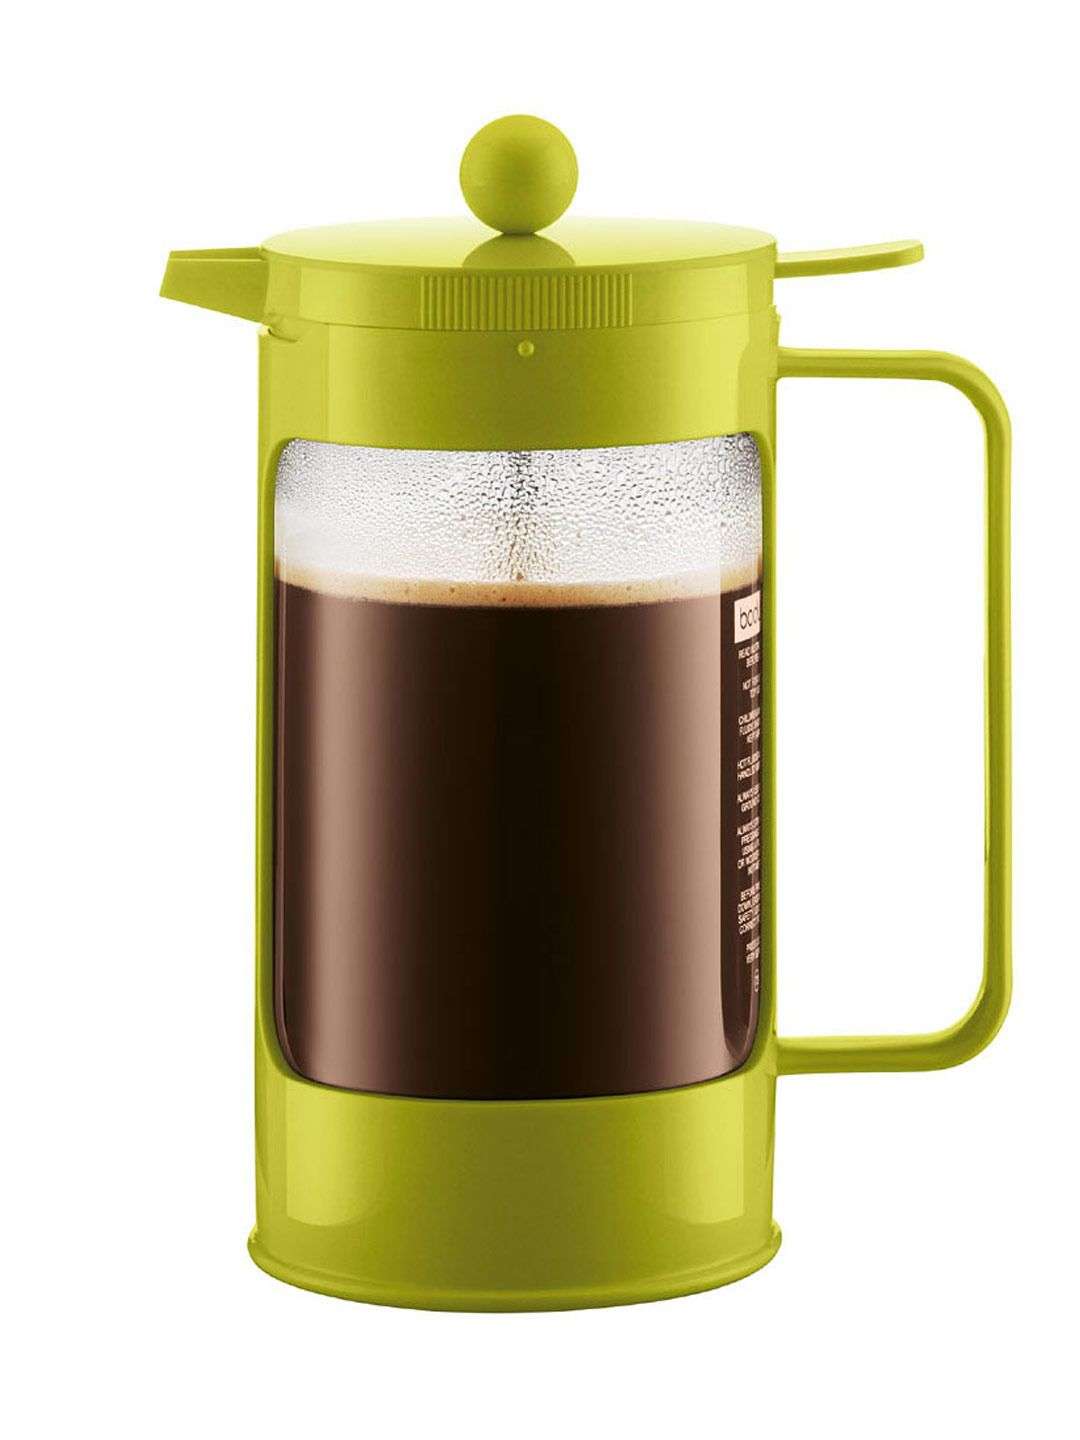 i would really like to learn how to make french press ...